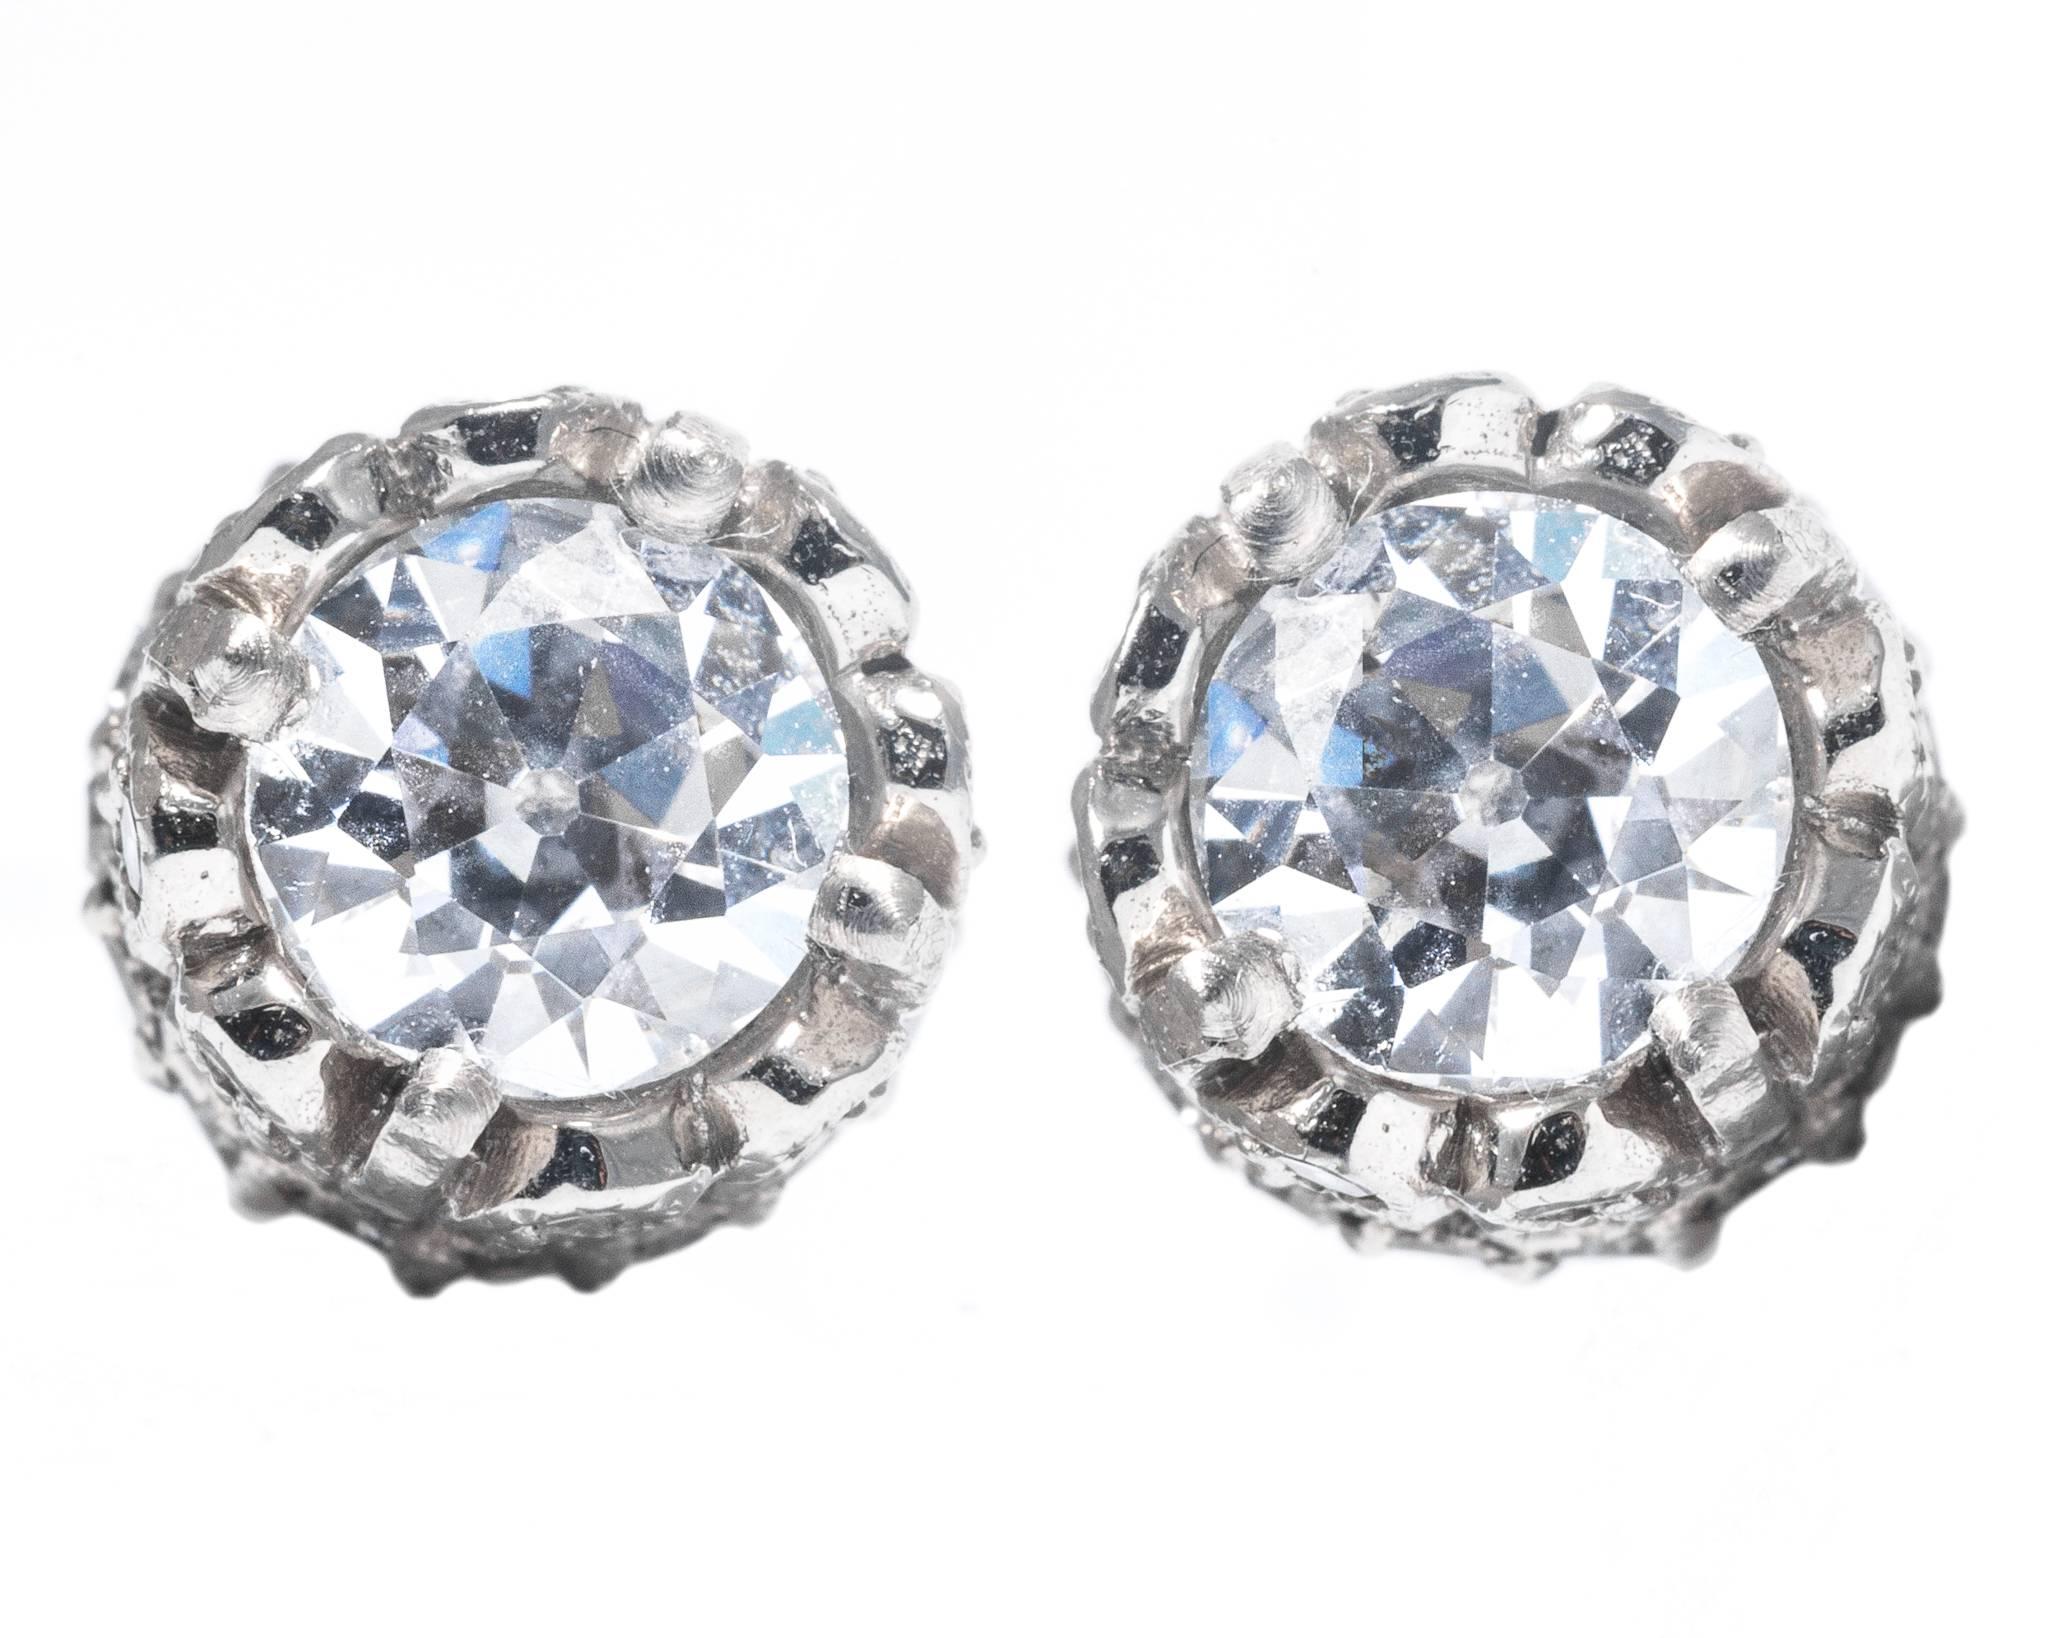 A pair of beautiful pave set diamond stud earrings. Set with a total of sixty two accenting diamonds, and two center European cut diamonds, these earrings offer a fantastic twist on traditional diamond studs.

Grading as superb VS2 clarity and